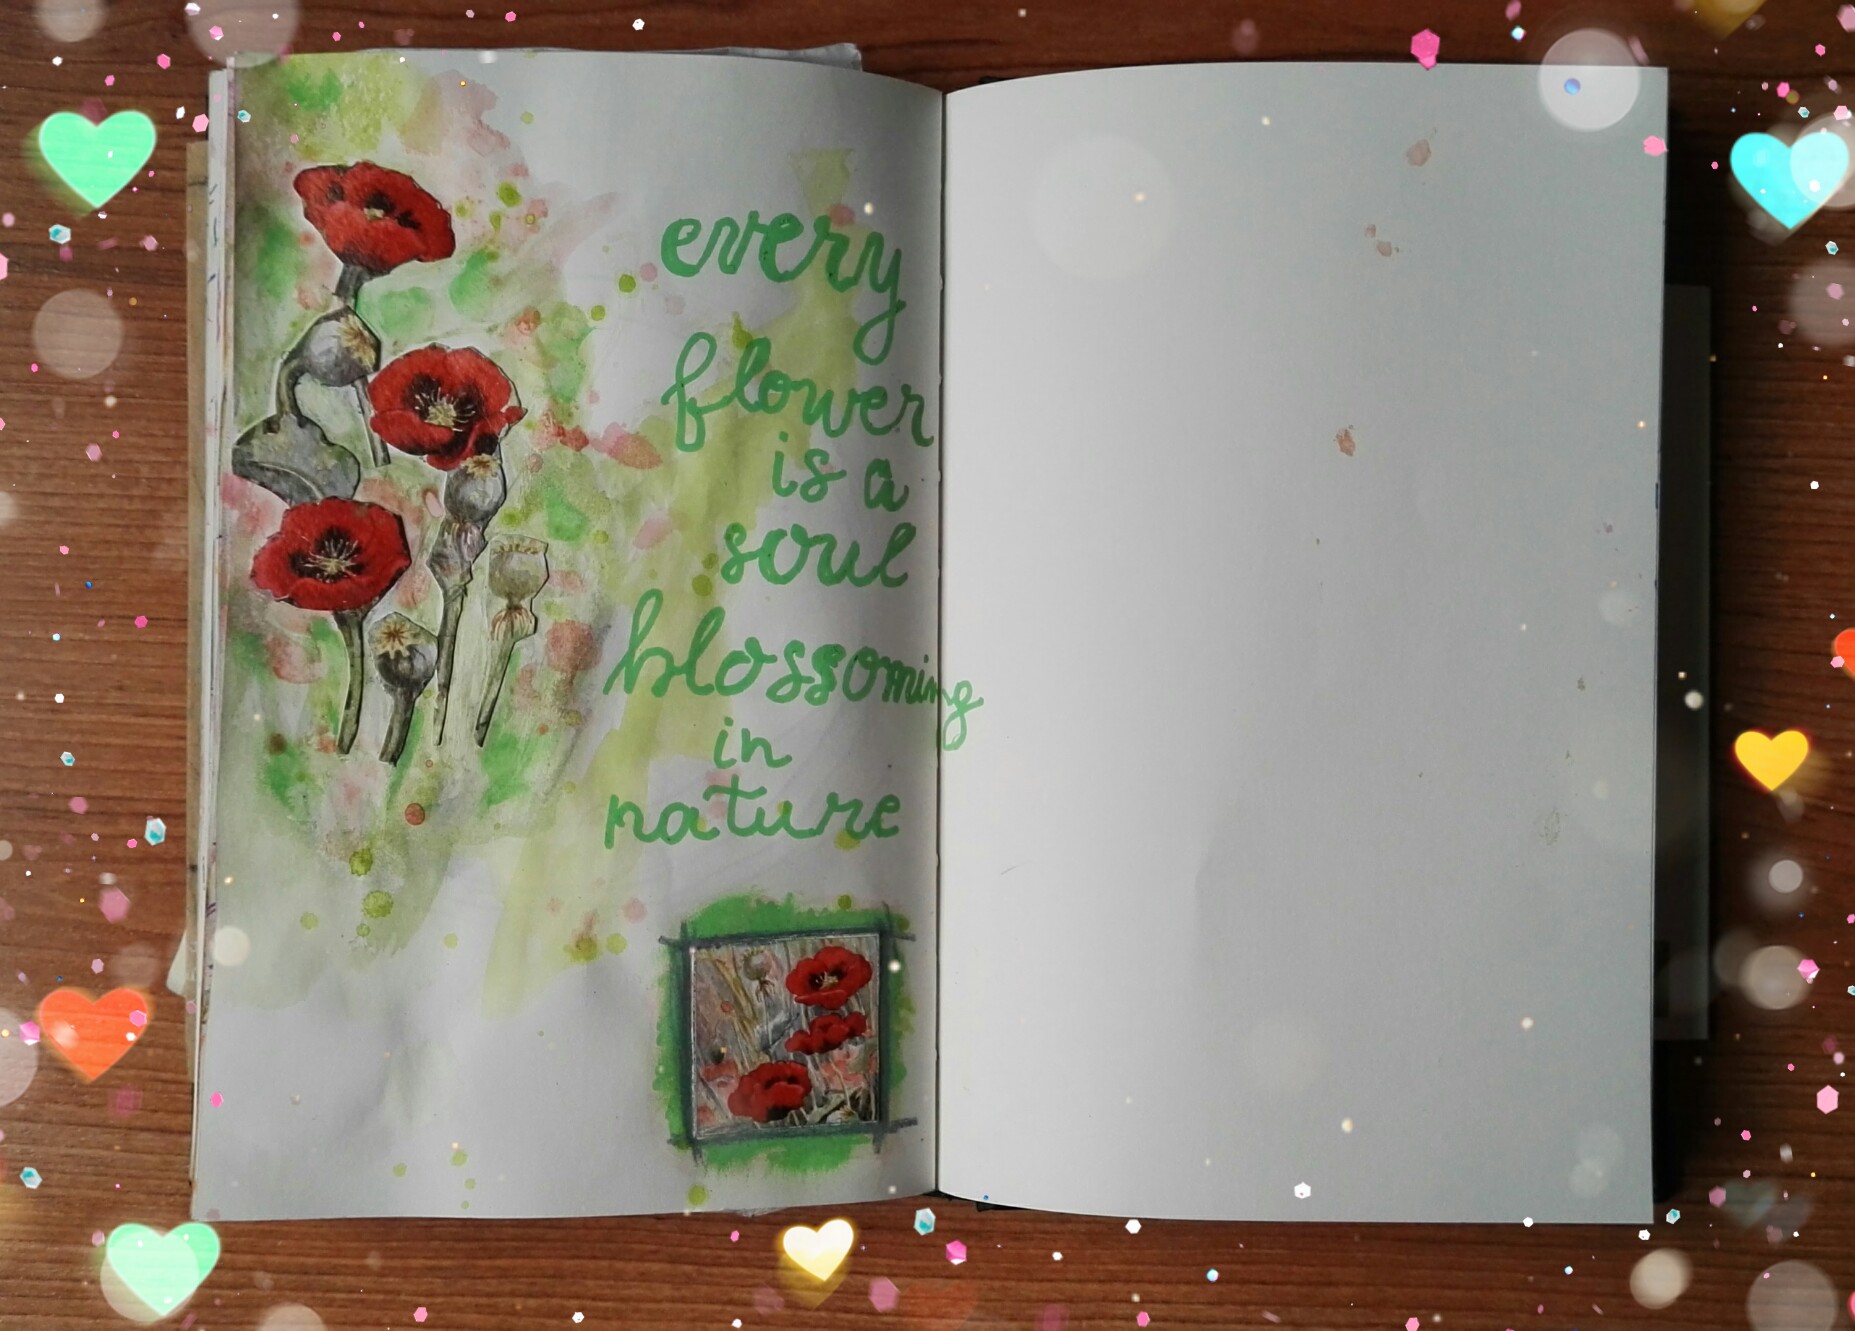 The Quoted pages – Every flower is a soul blossoming in nature